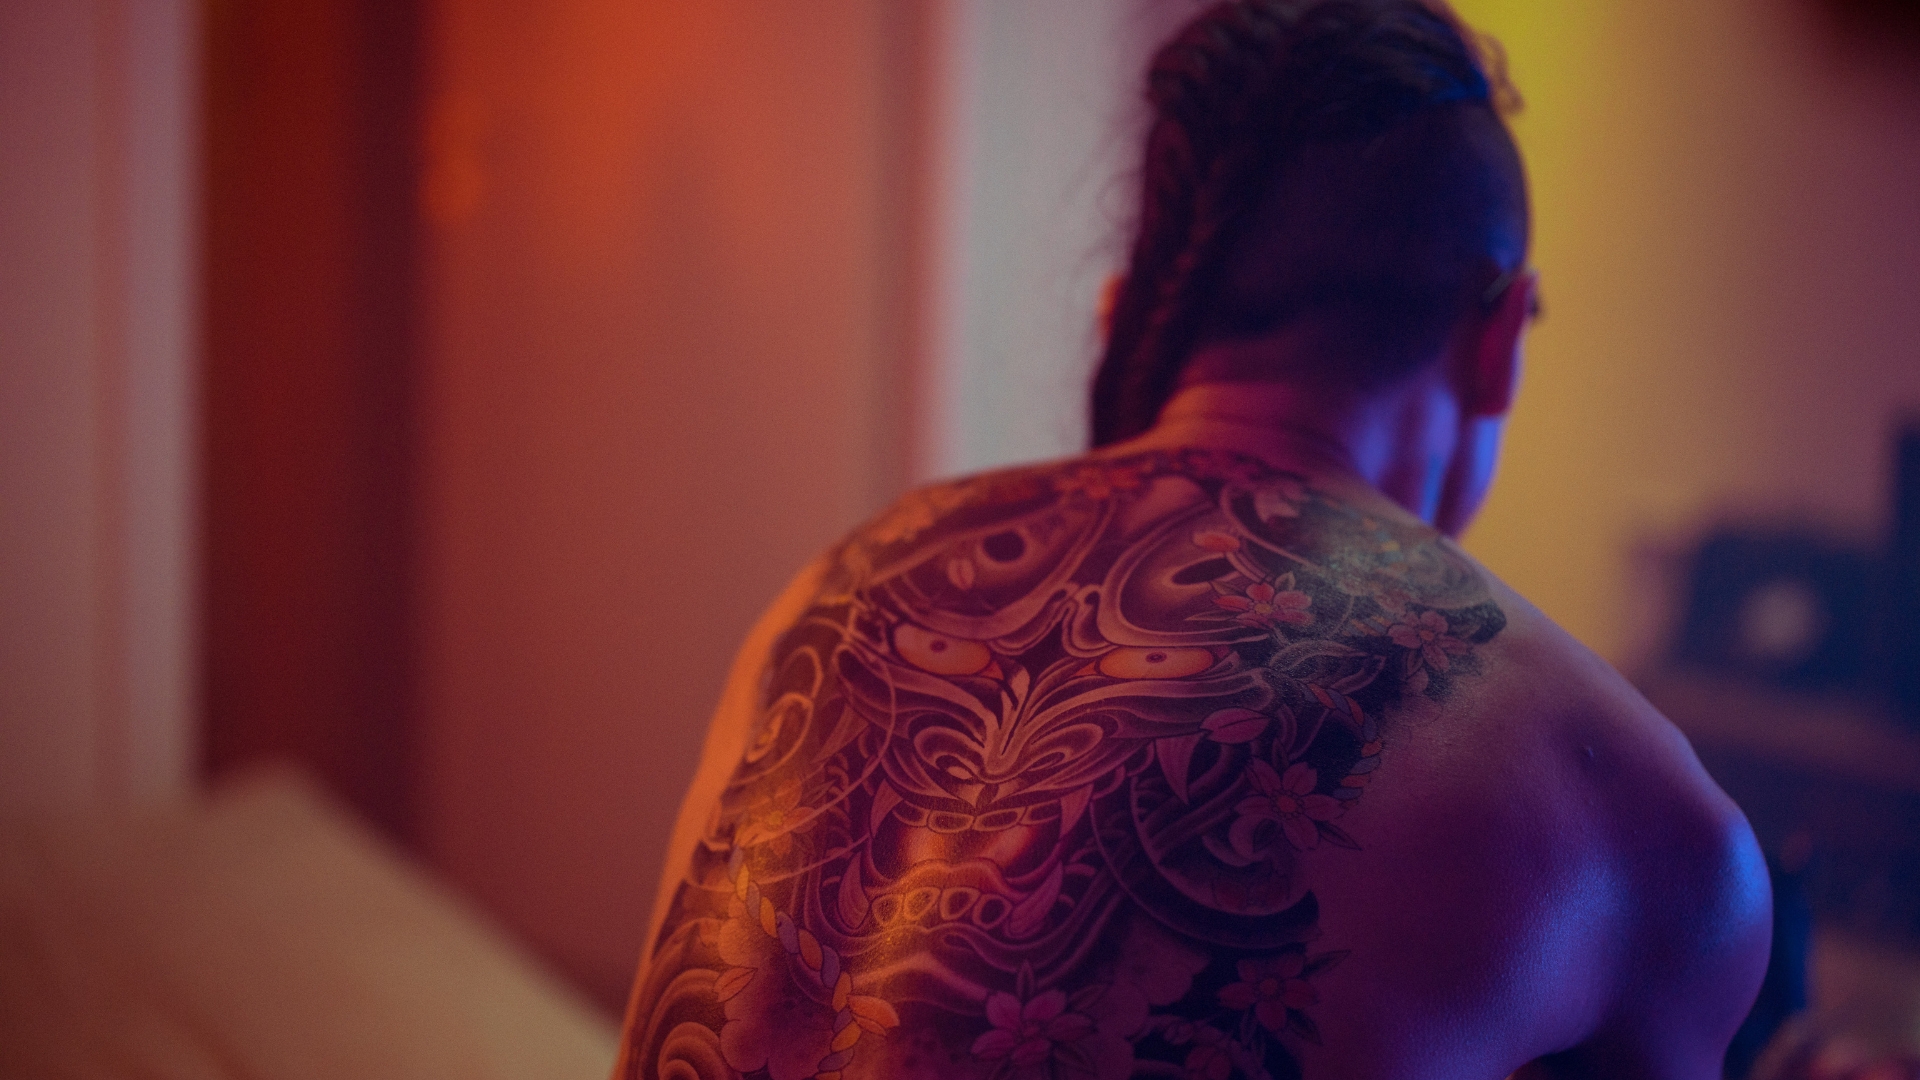 Japanese person with a large tattoo on their back